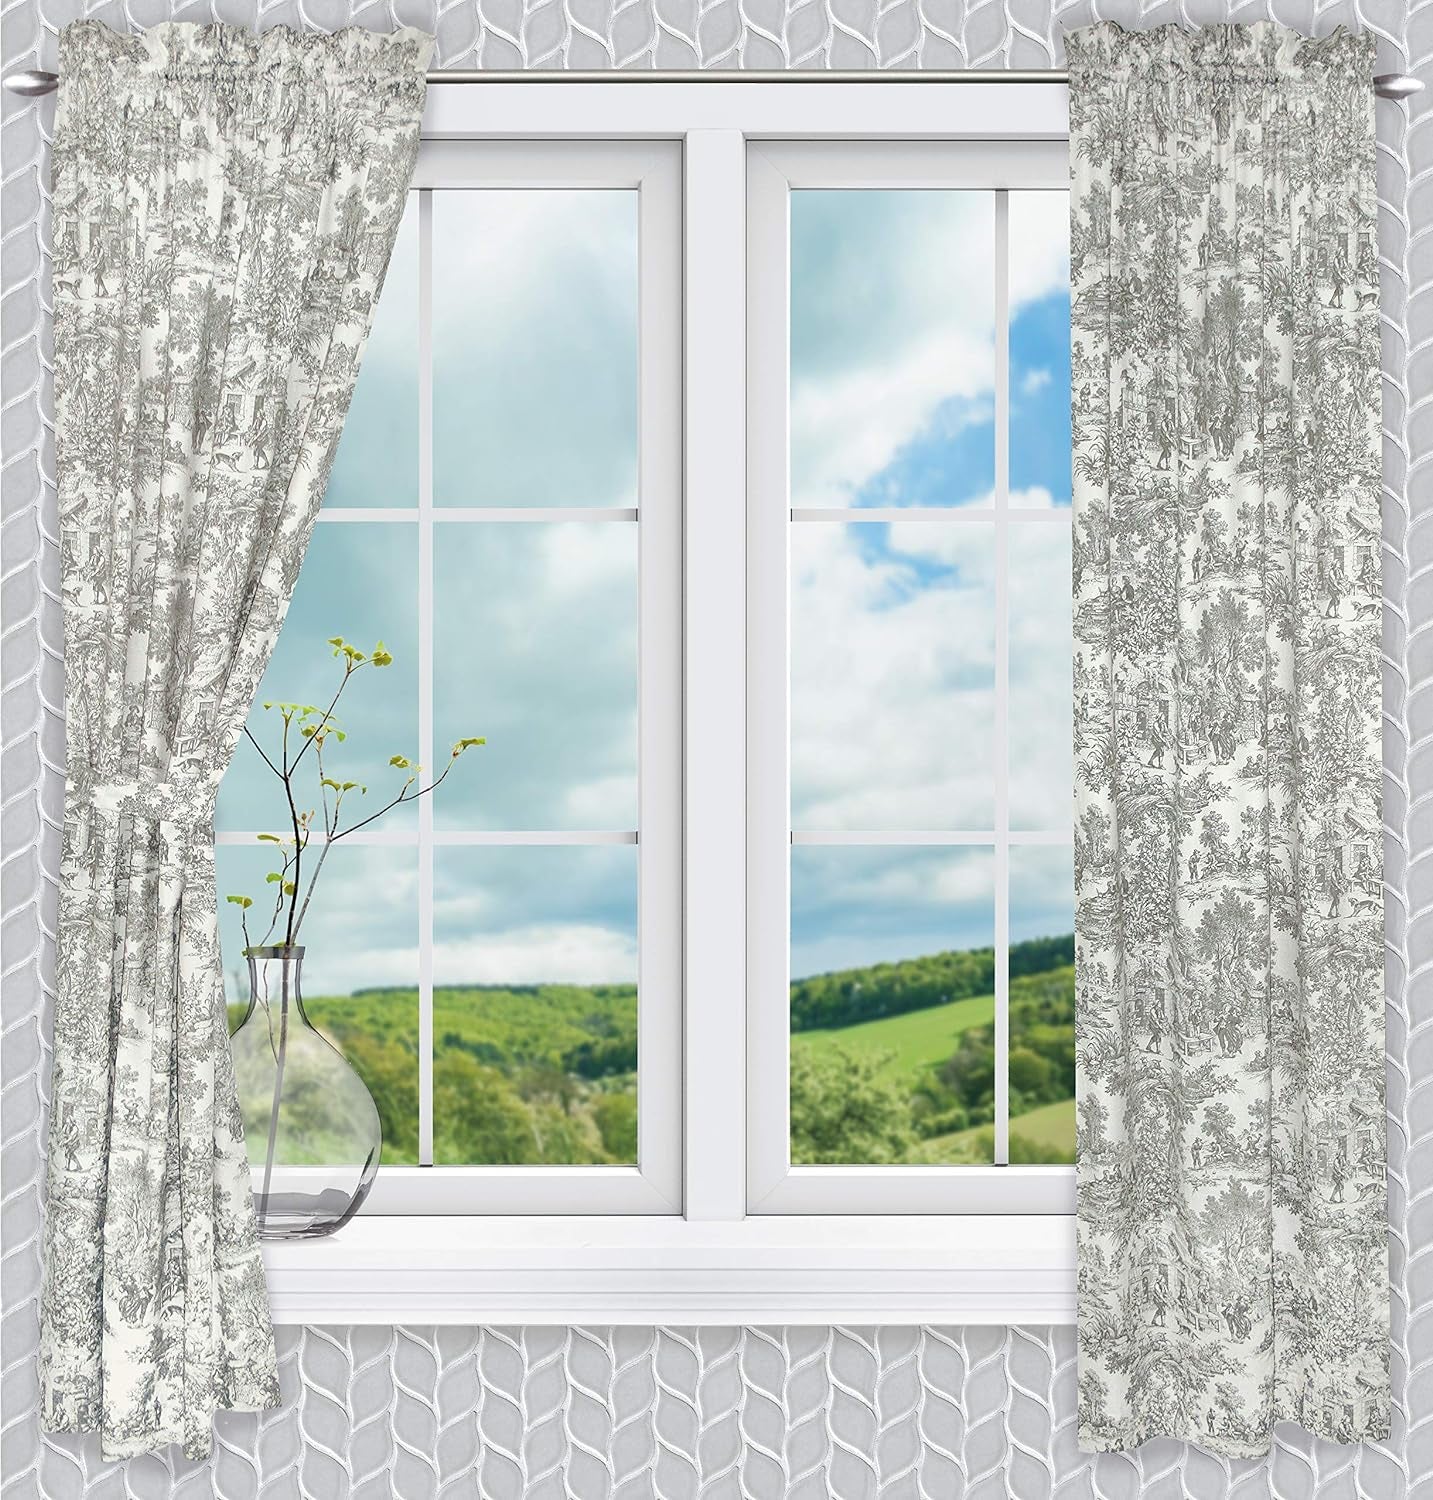 Ellis Curtain Victoria Park Toile 68-Inch-By-84 Inch Tailored Panel Pair with Tiebacks, Black  Ellis Curtain Grey 68" X 63" 